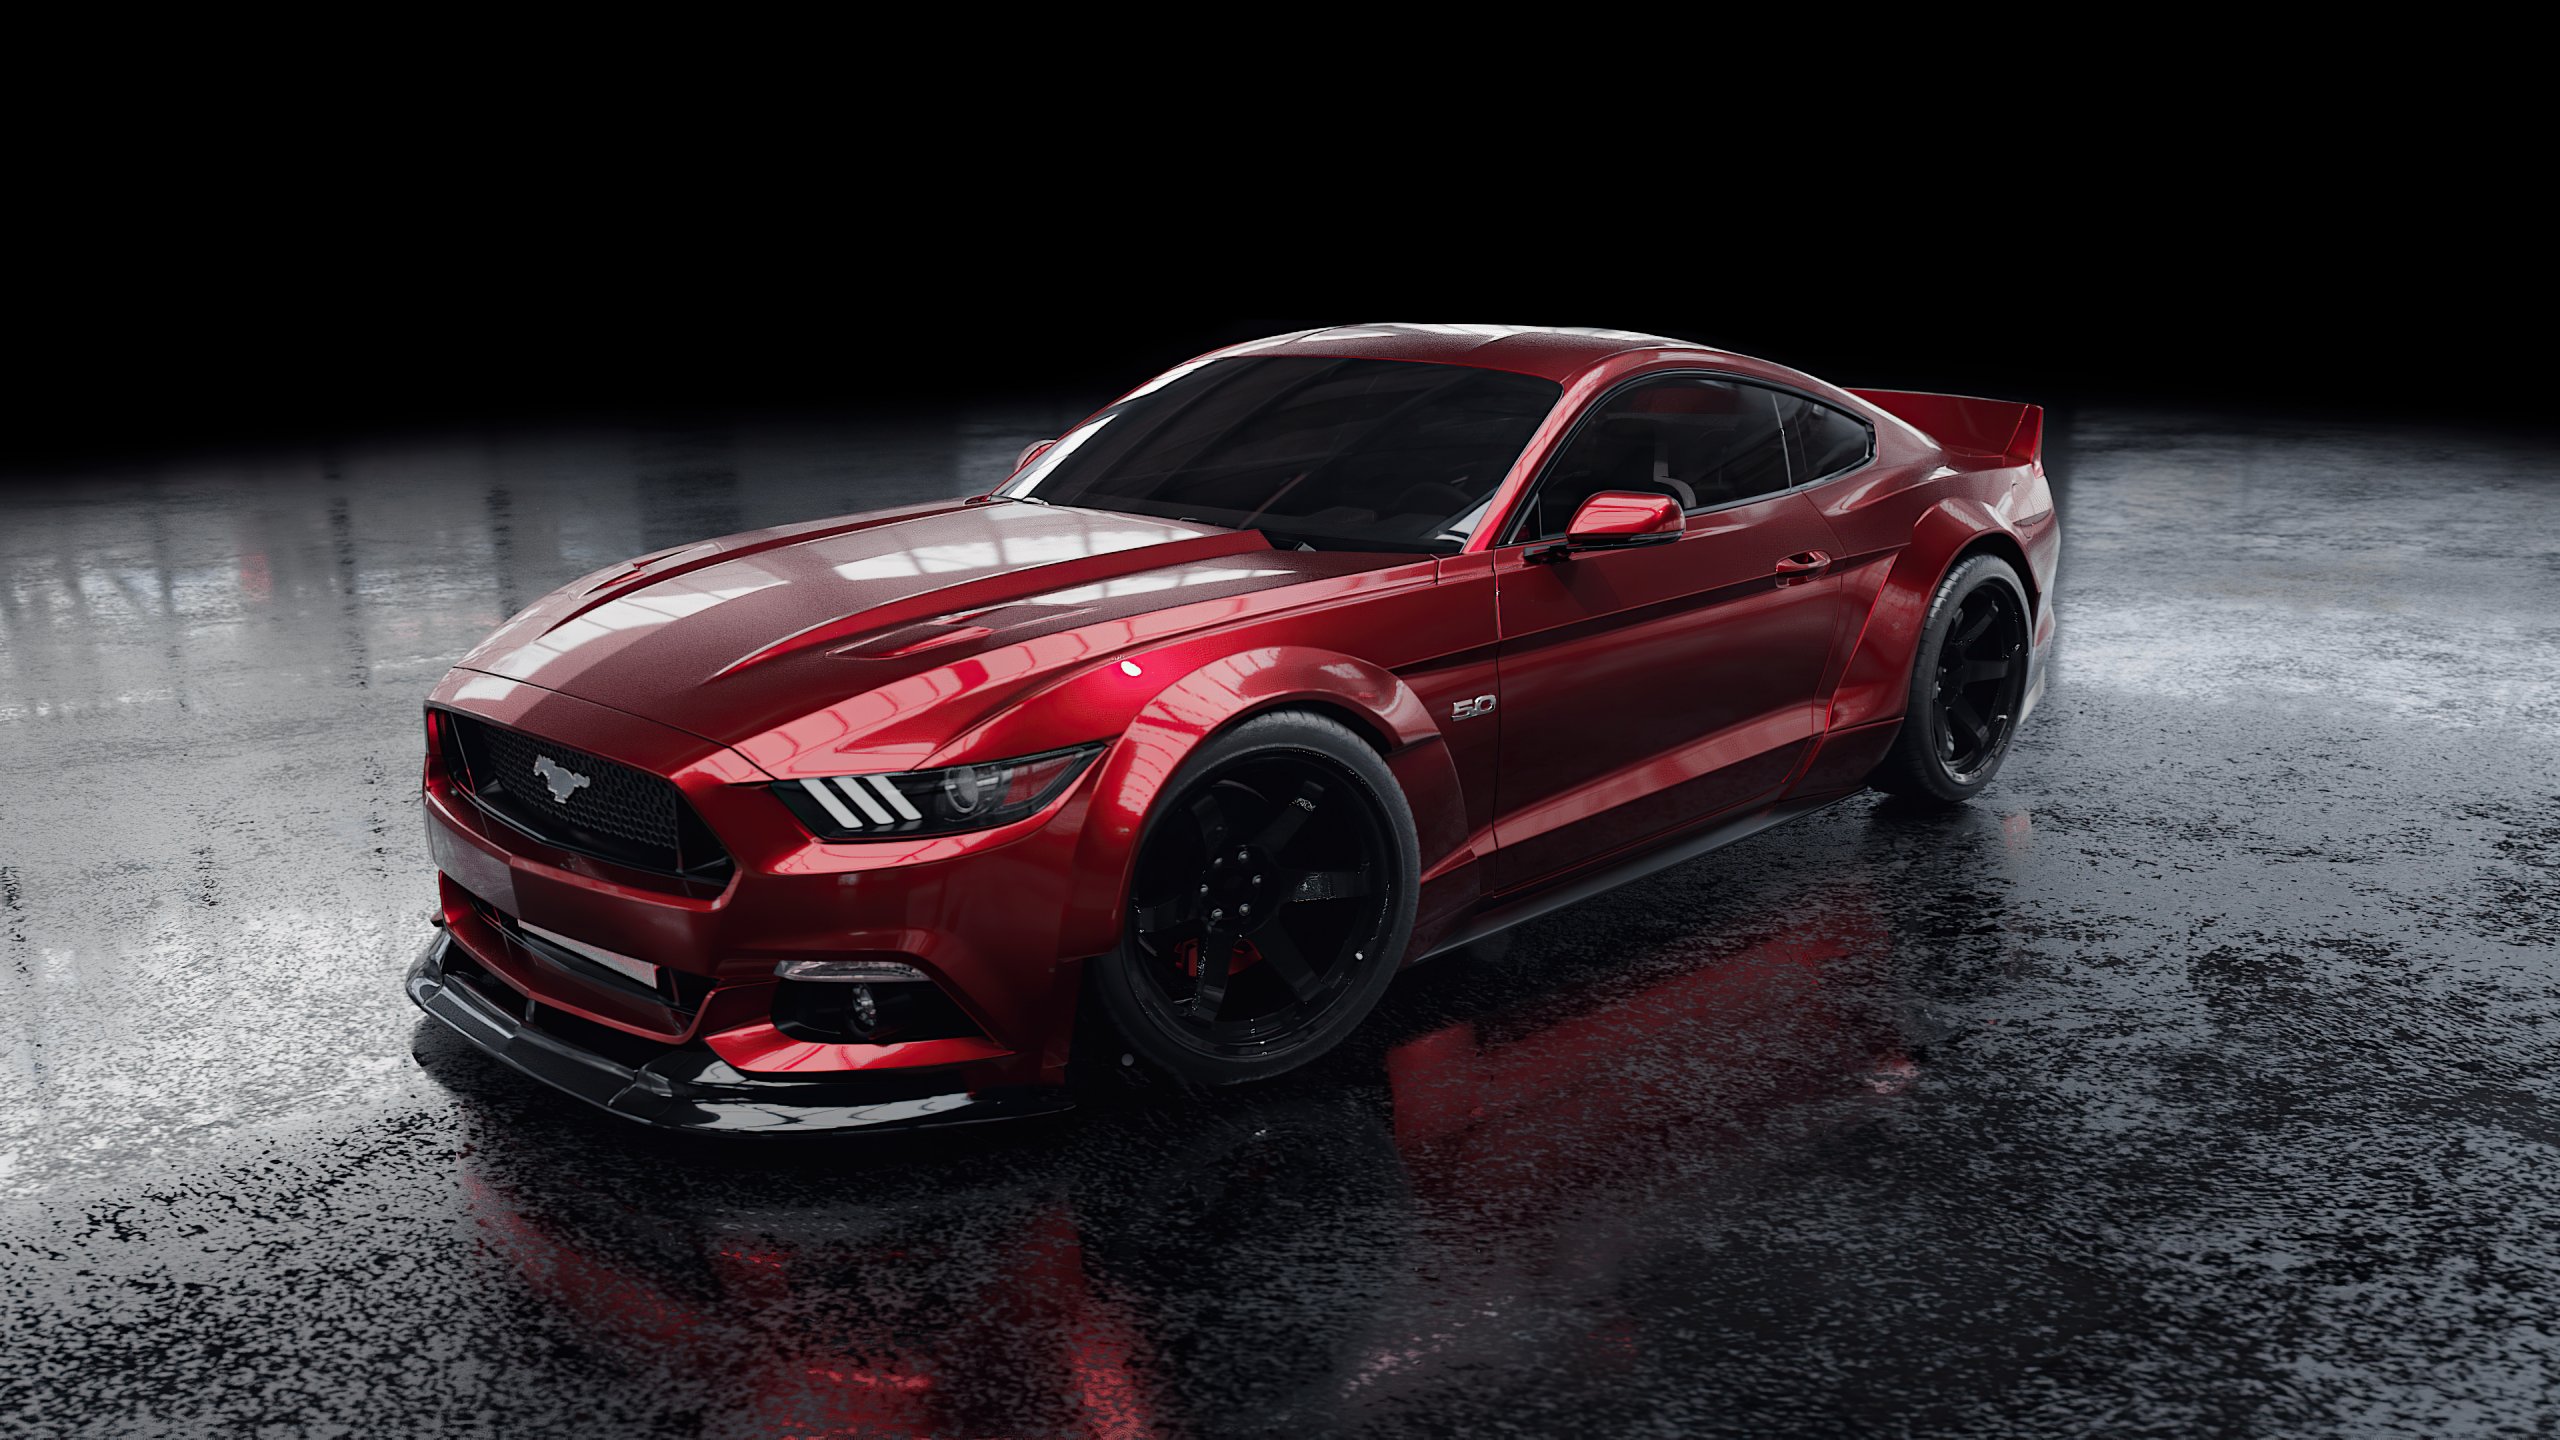 Red Ford Mustang Wallpaper 4k Ultra HD ID:6338